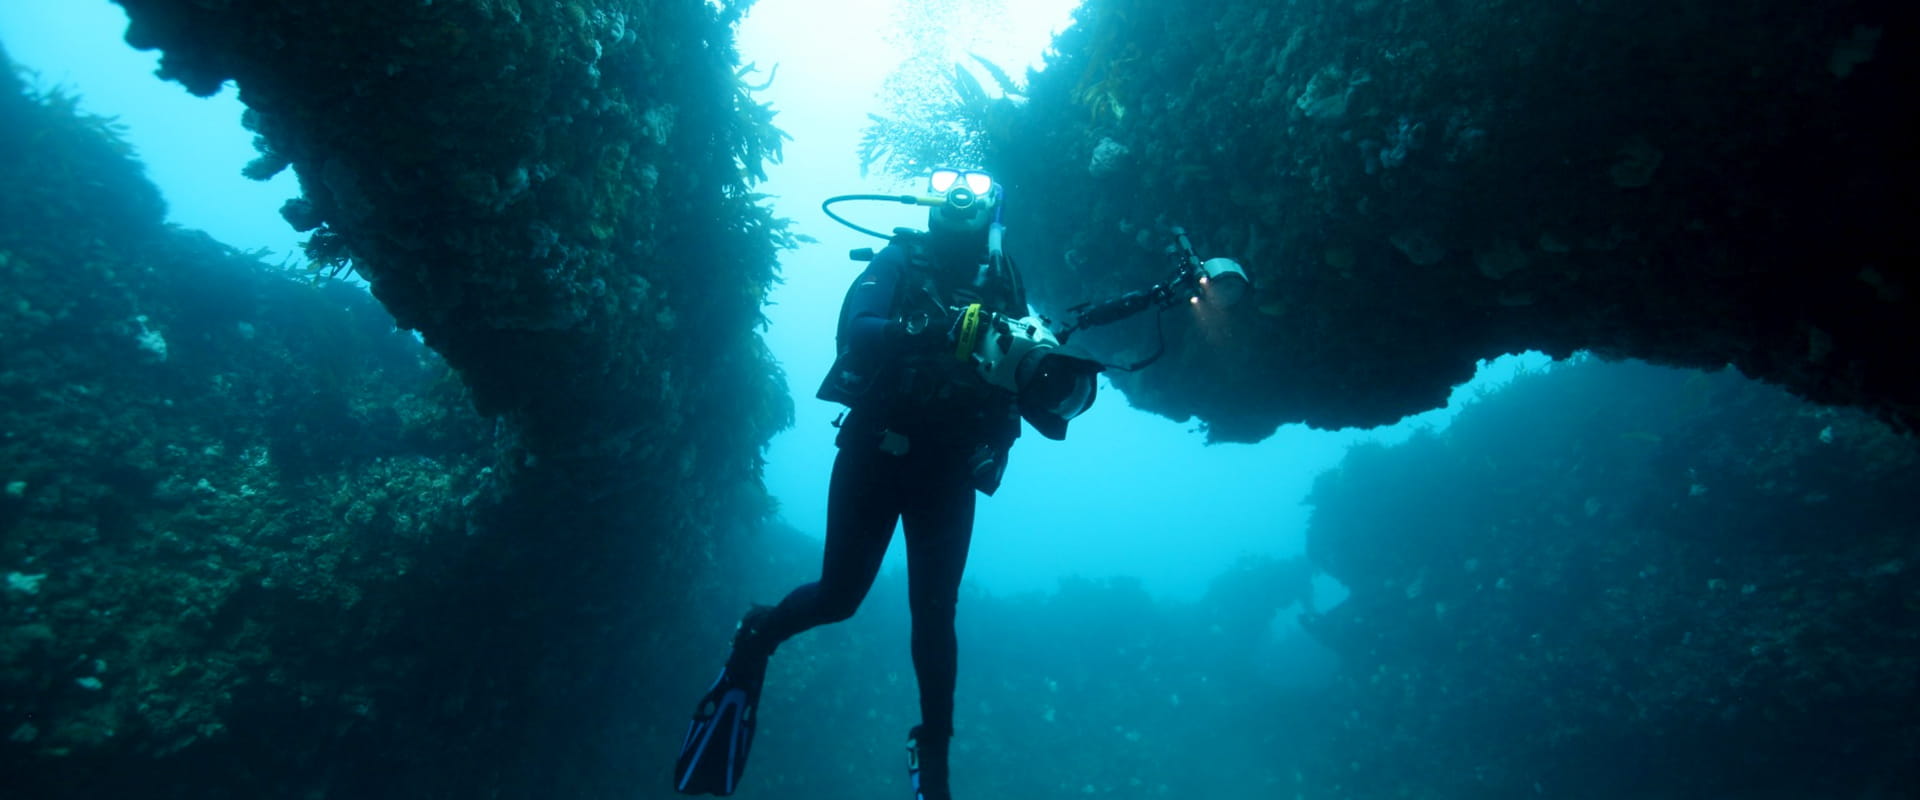 A scuba diver is holding a large underwater camera rig and is underwater beneath two rocky arches covered in coral and marine life.